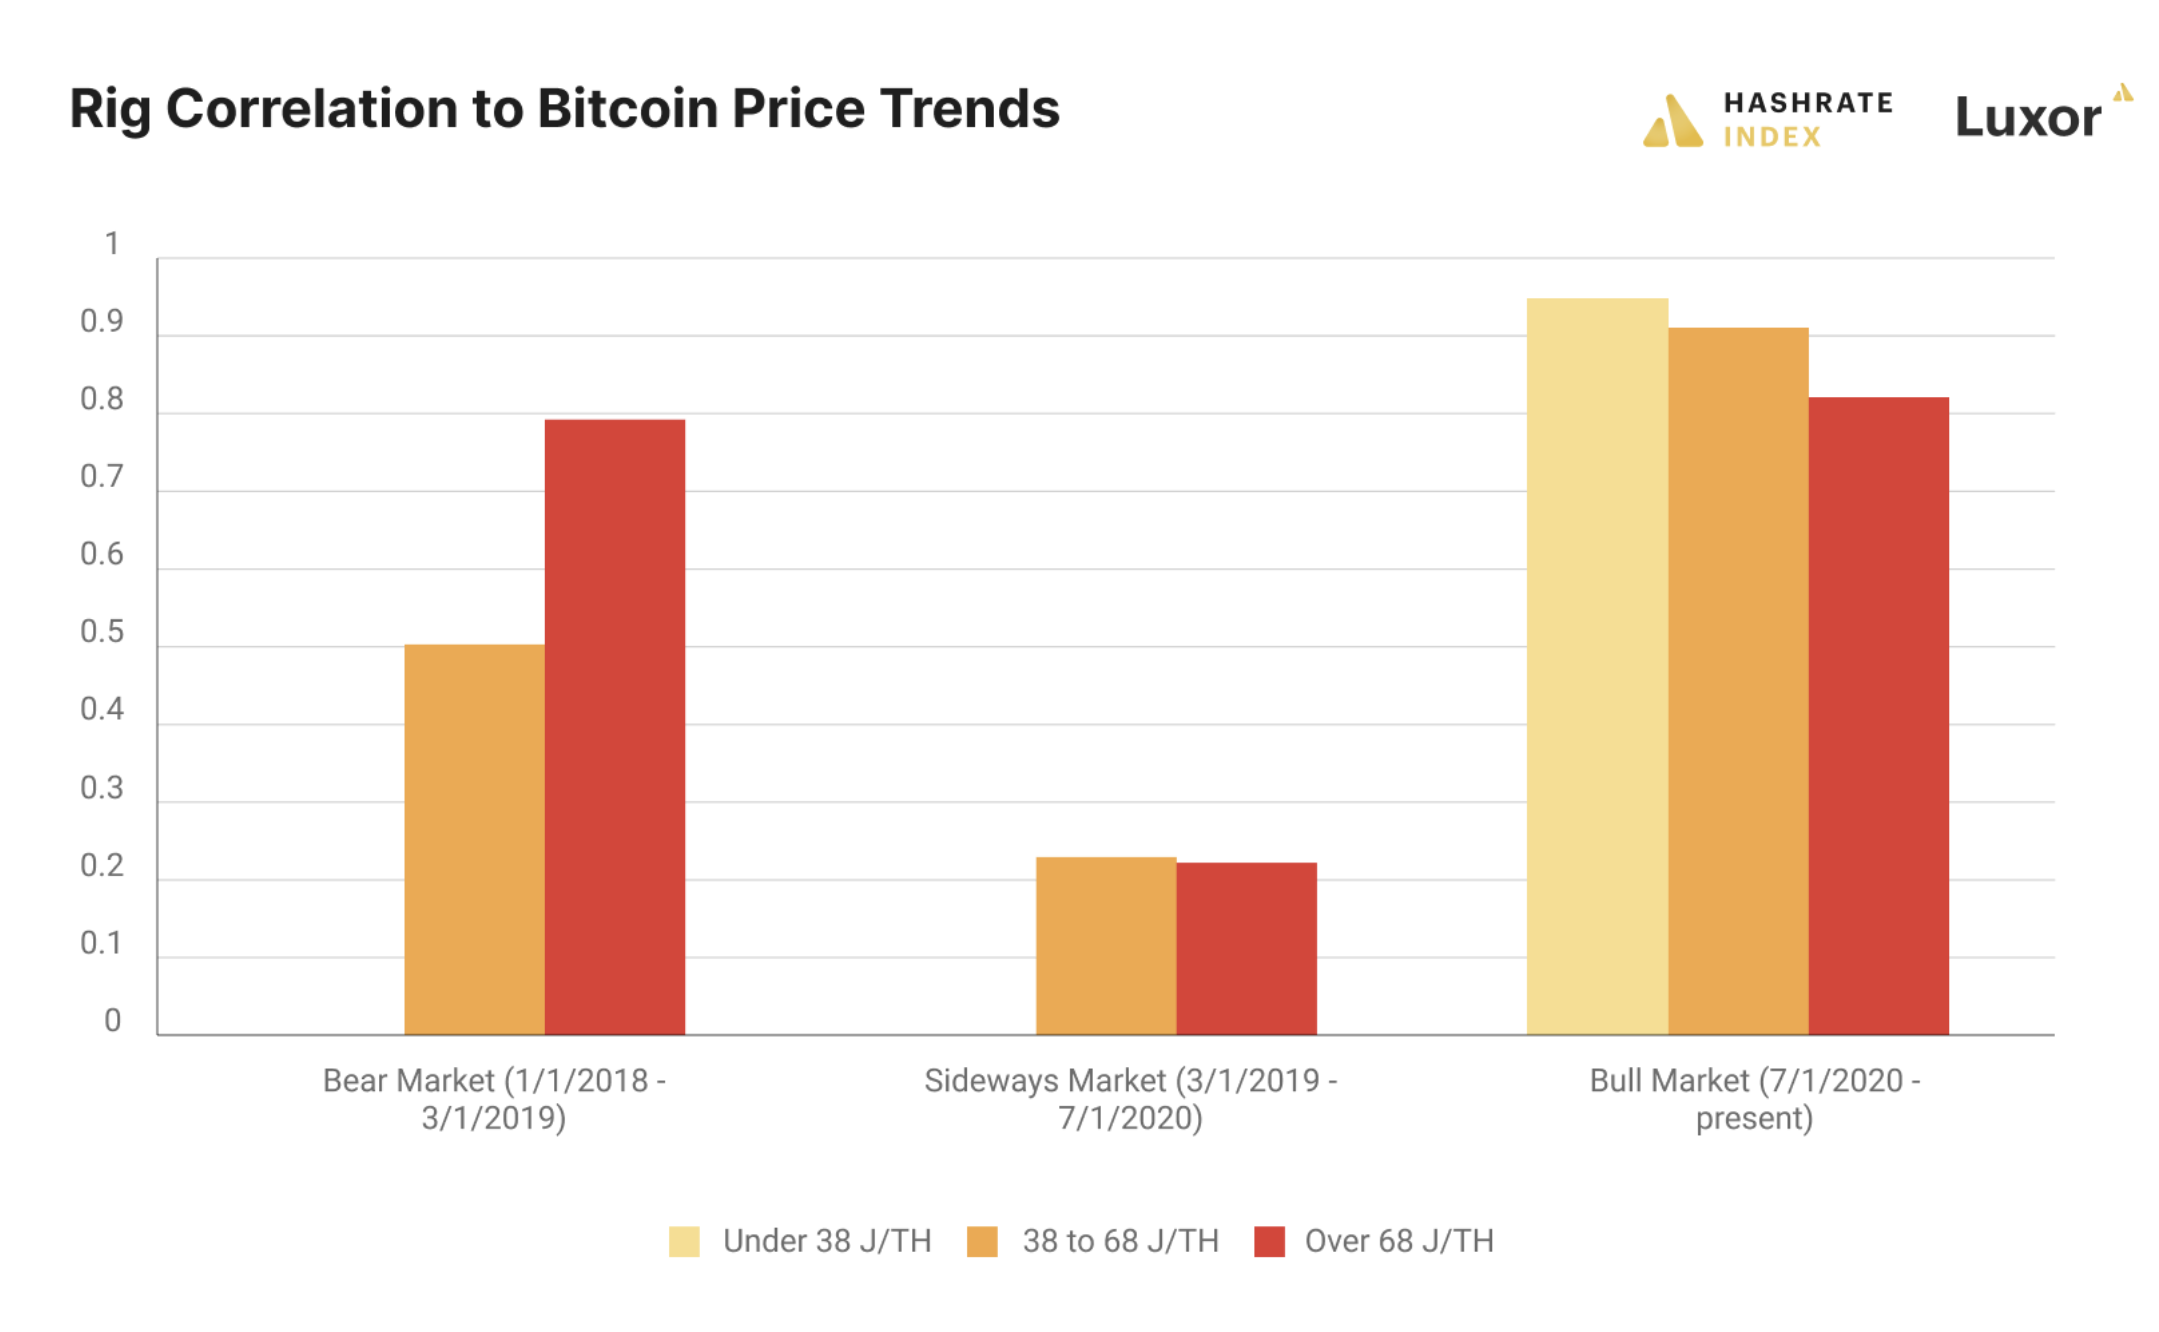 Bitcoin ASICs of different efficiency tiers are more or less correlated to Bitcoin's price depending on the nature of the market 